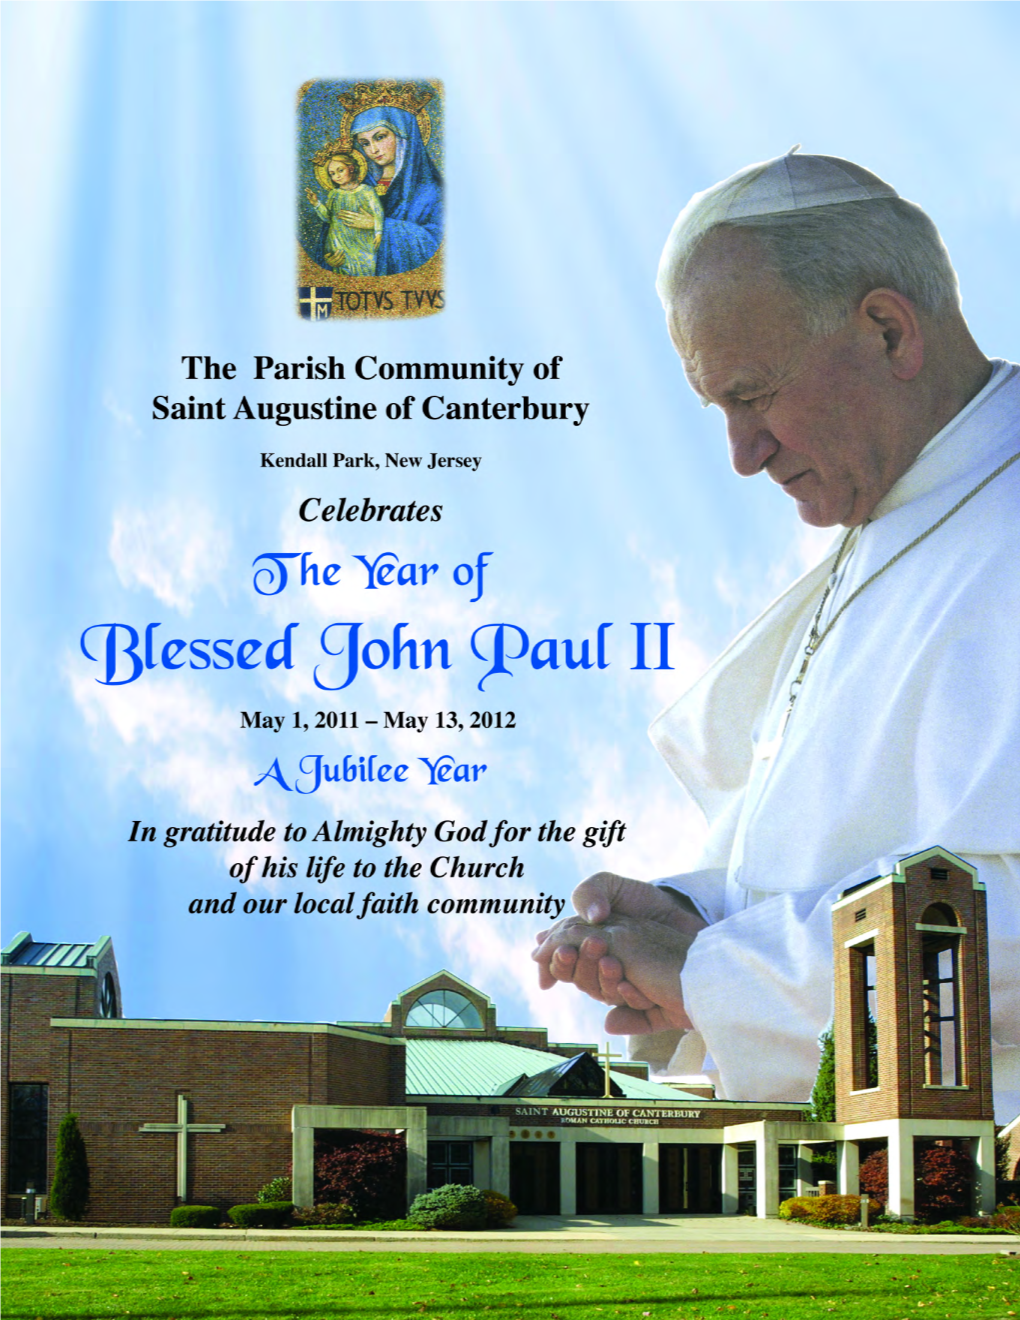 Father Bob Receives a GRACE and GIFT from Saint John Paul II